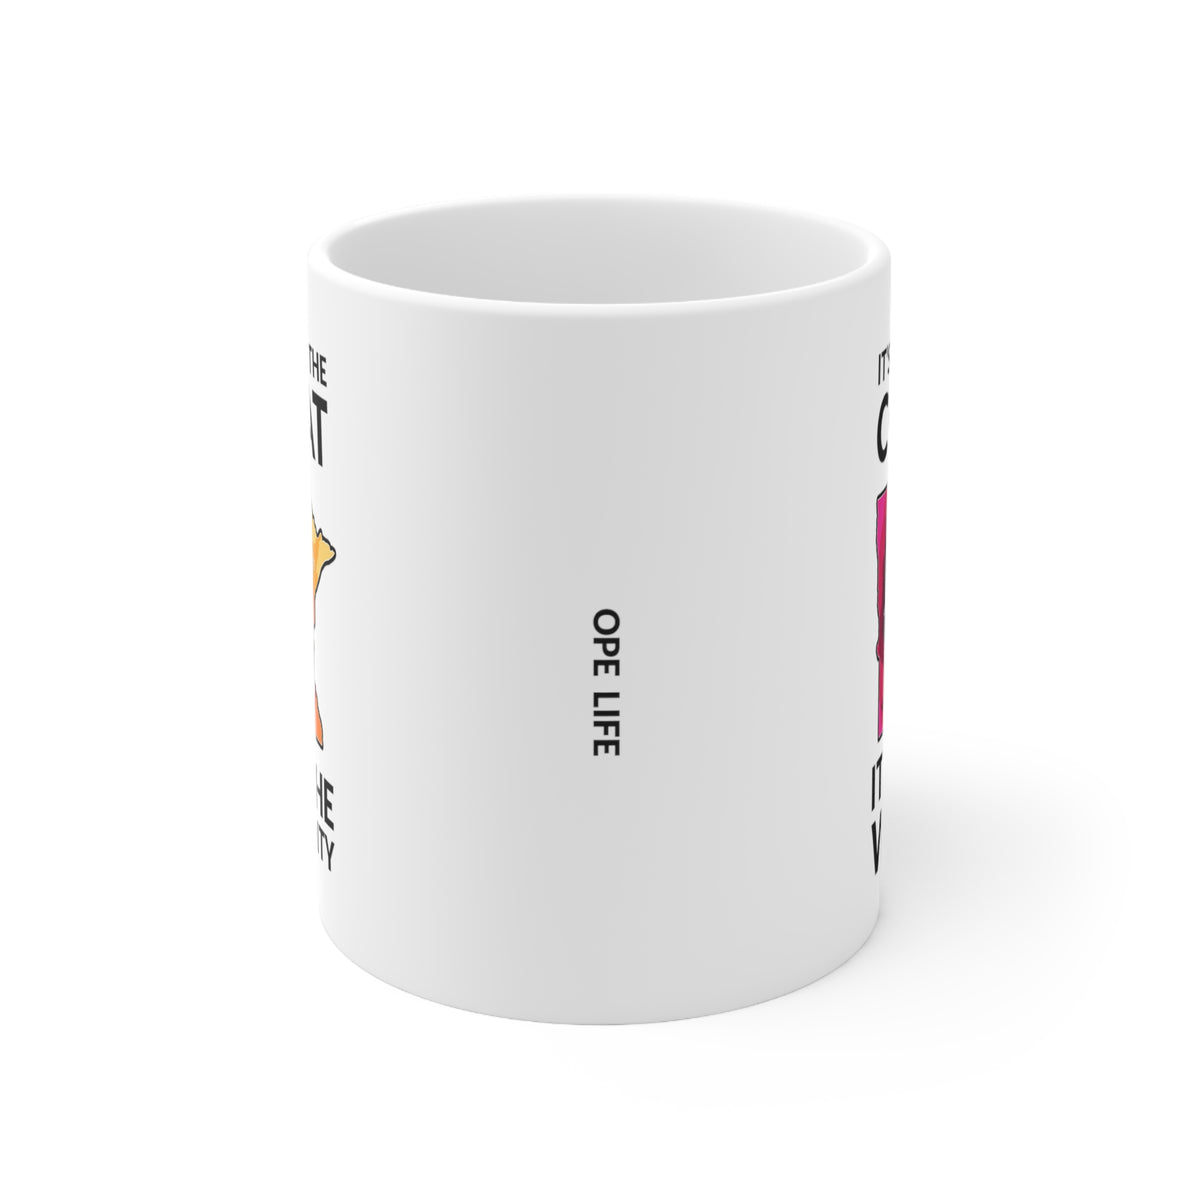 IT'S NOT THE HEAT IT'S THE HUMIDITY & COLD/WIND DOUBLE SIDED MUG